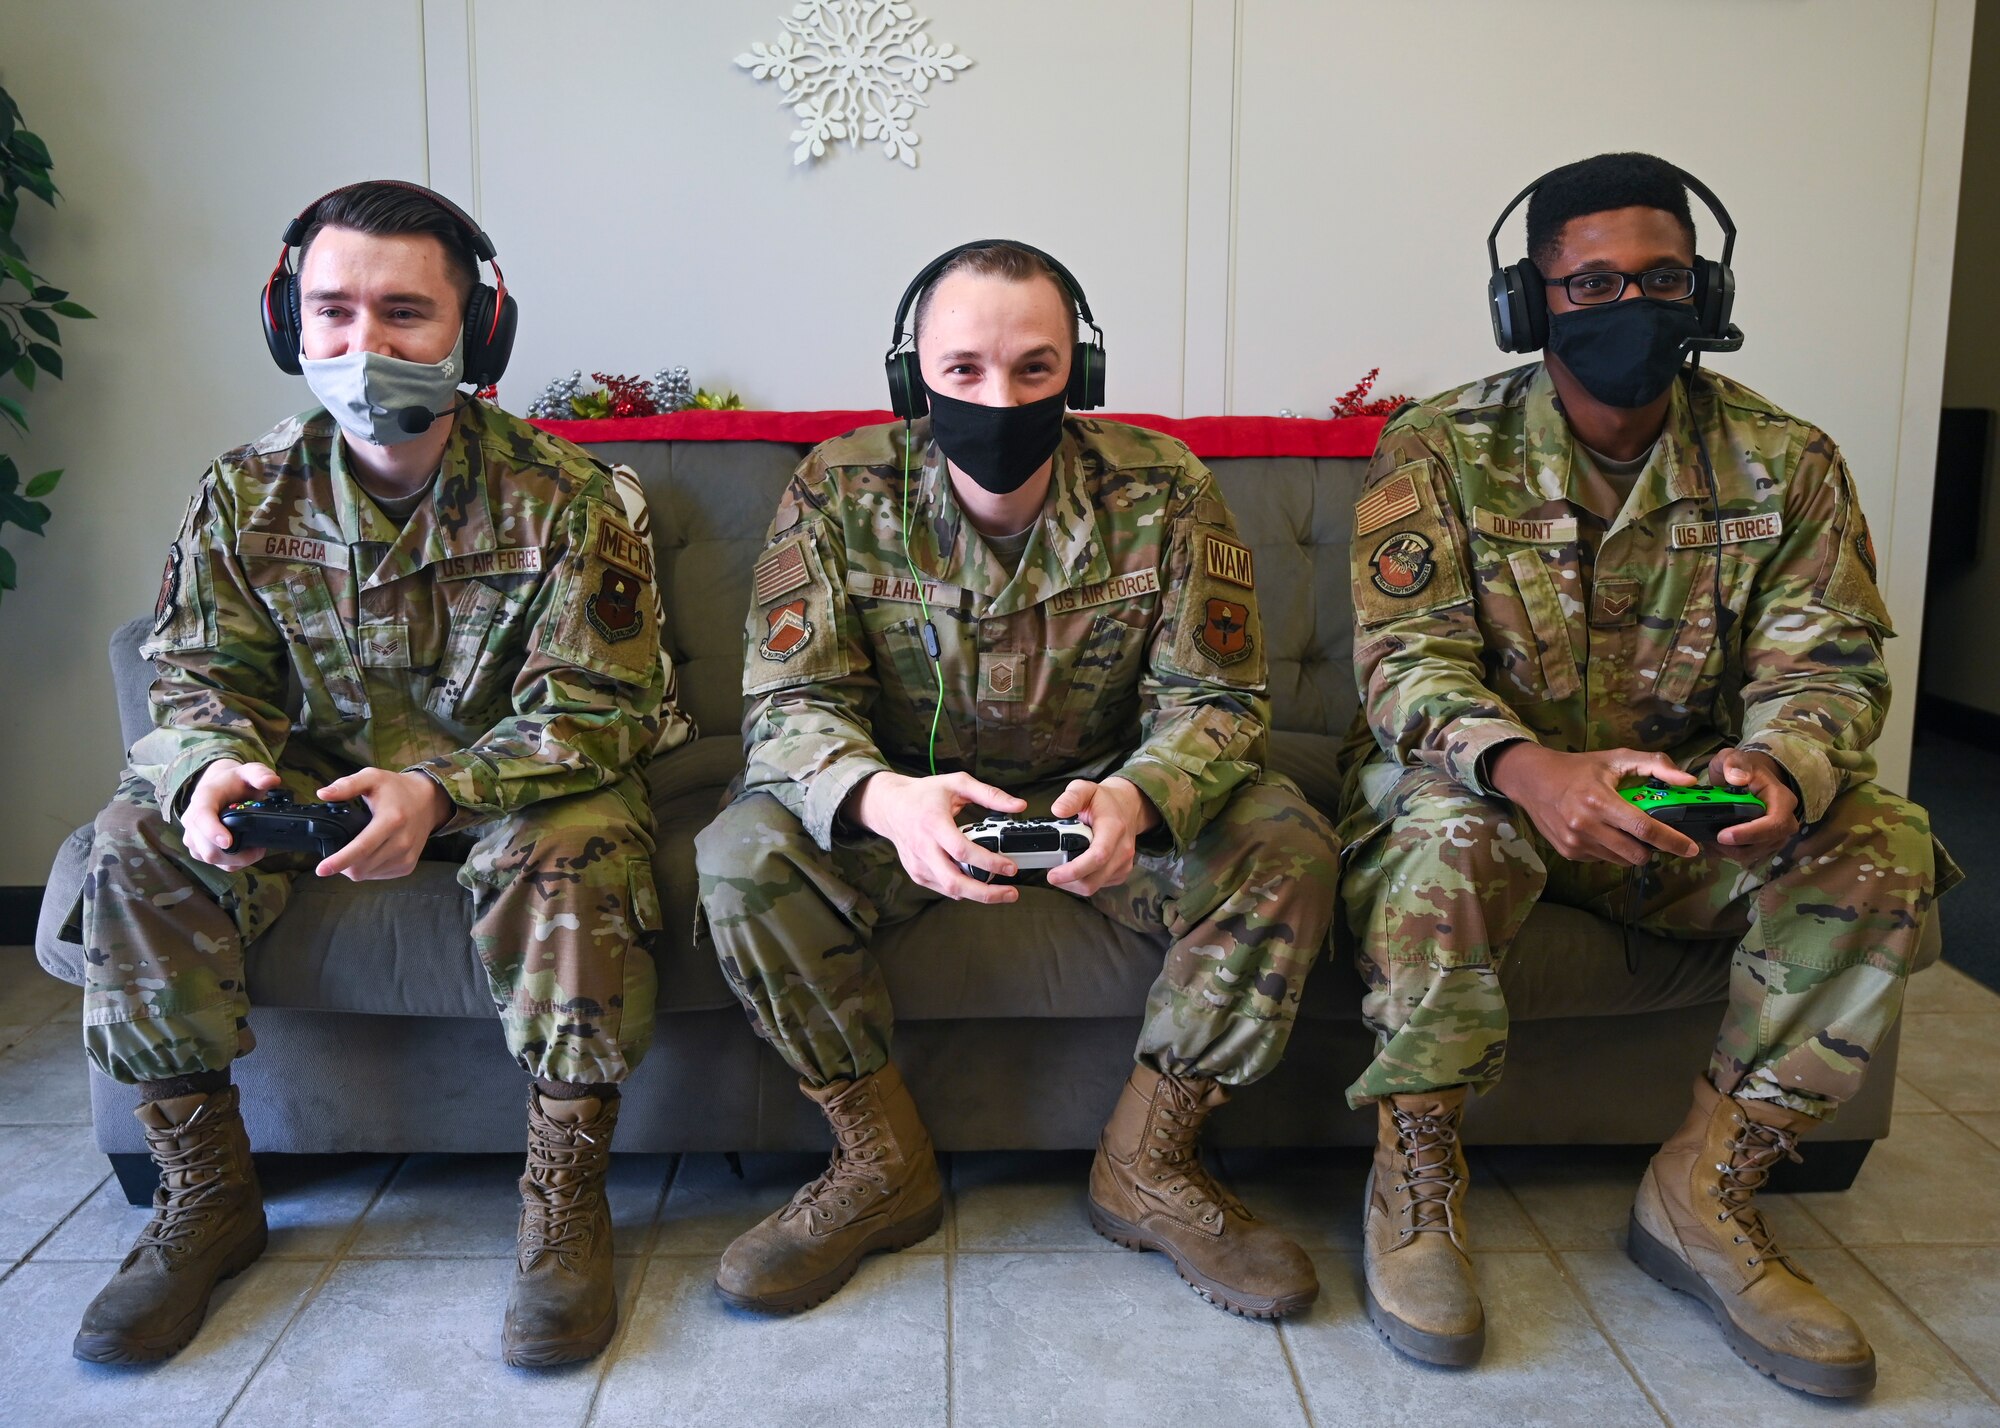 (Left to right) Senior Airman Isaac Garcia, 308th Aircraft Maintenance Unit assistant dedicated crew chief, Master Sgt. Joseph Blahut, 56th Maintenance Group wing avionics manager, and Senior Airman Jeffrey Dupont, 308th AMU autonomic logistics information system expeditor, play a video game together Dec. 14, 2021, at Luke Air Force Base, Arizona. The Airmen make up a team they call “Joint Strike Fighters” in the Department of the Air Force Gaming League’s Apex Legends Tournament. Over 400 service members have competed in the tournament across the Air Force, which aims to strengthen teamwork and morale. (U.S. Air Force photo by Senior Airman David Busby.)